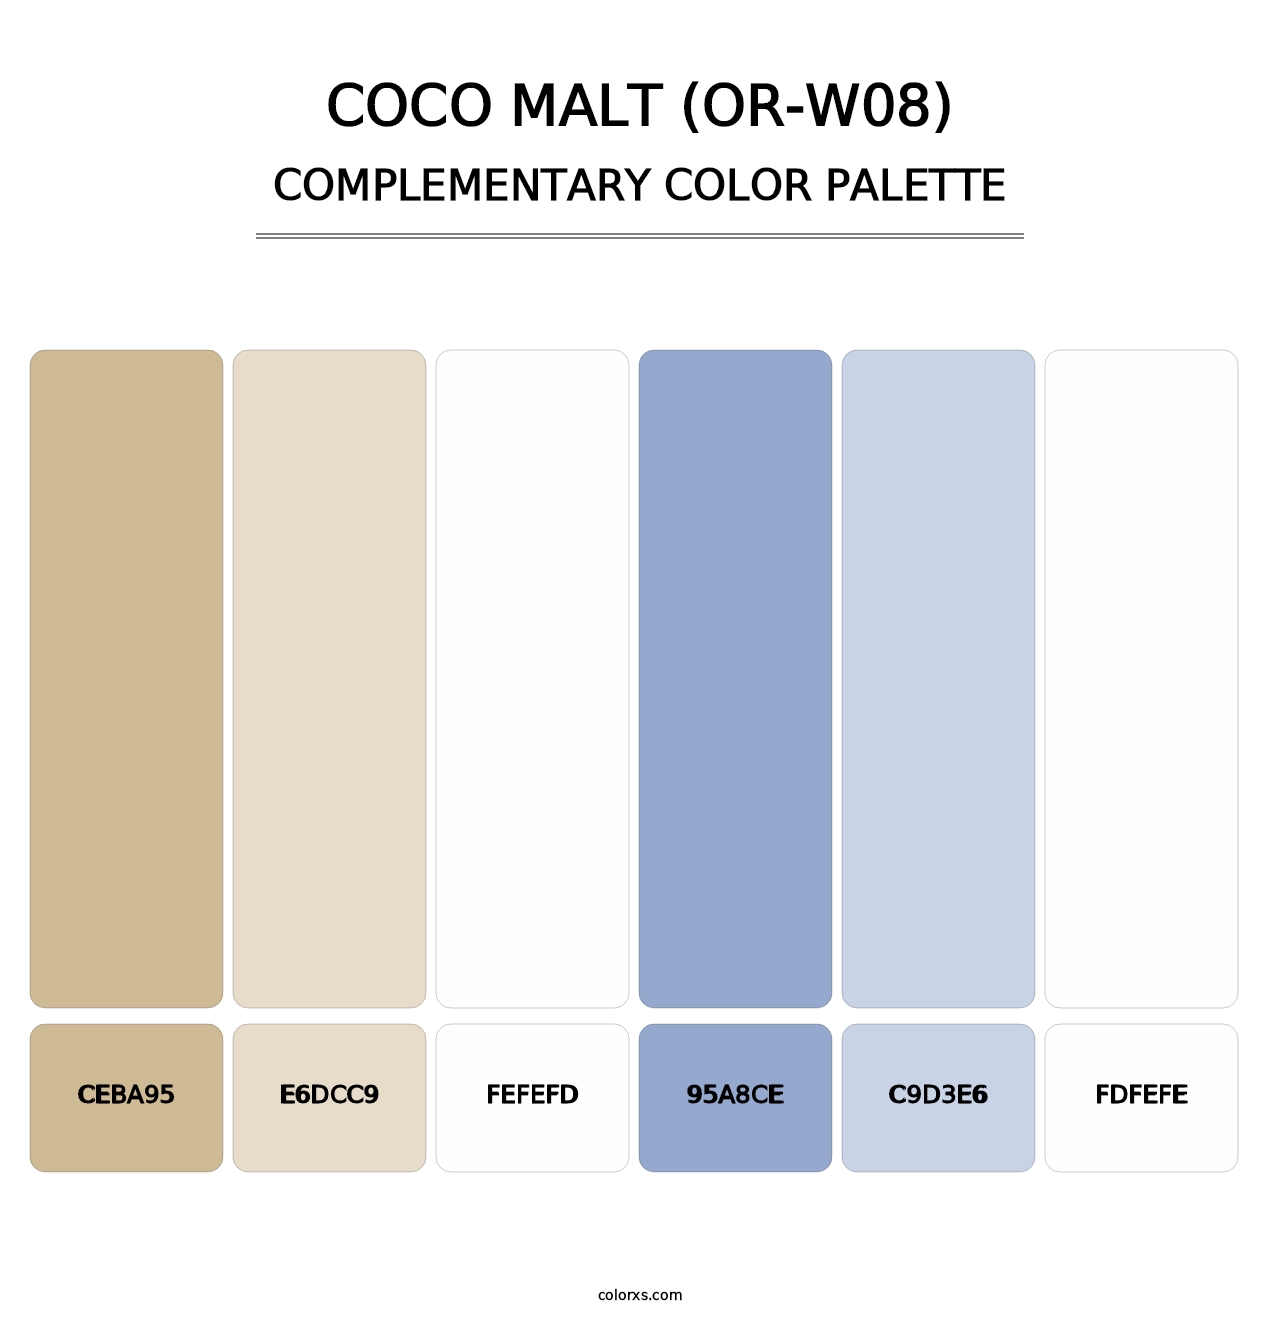 Coco Malt (OR-W08) - Complementary Color Palette